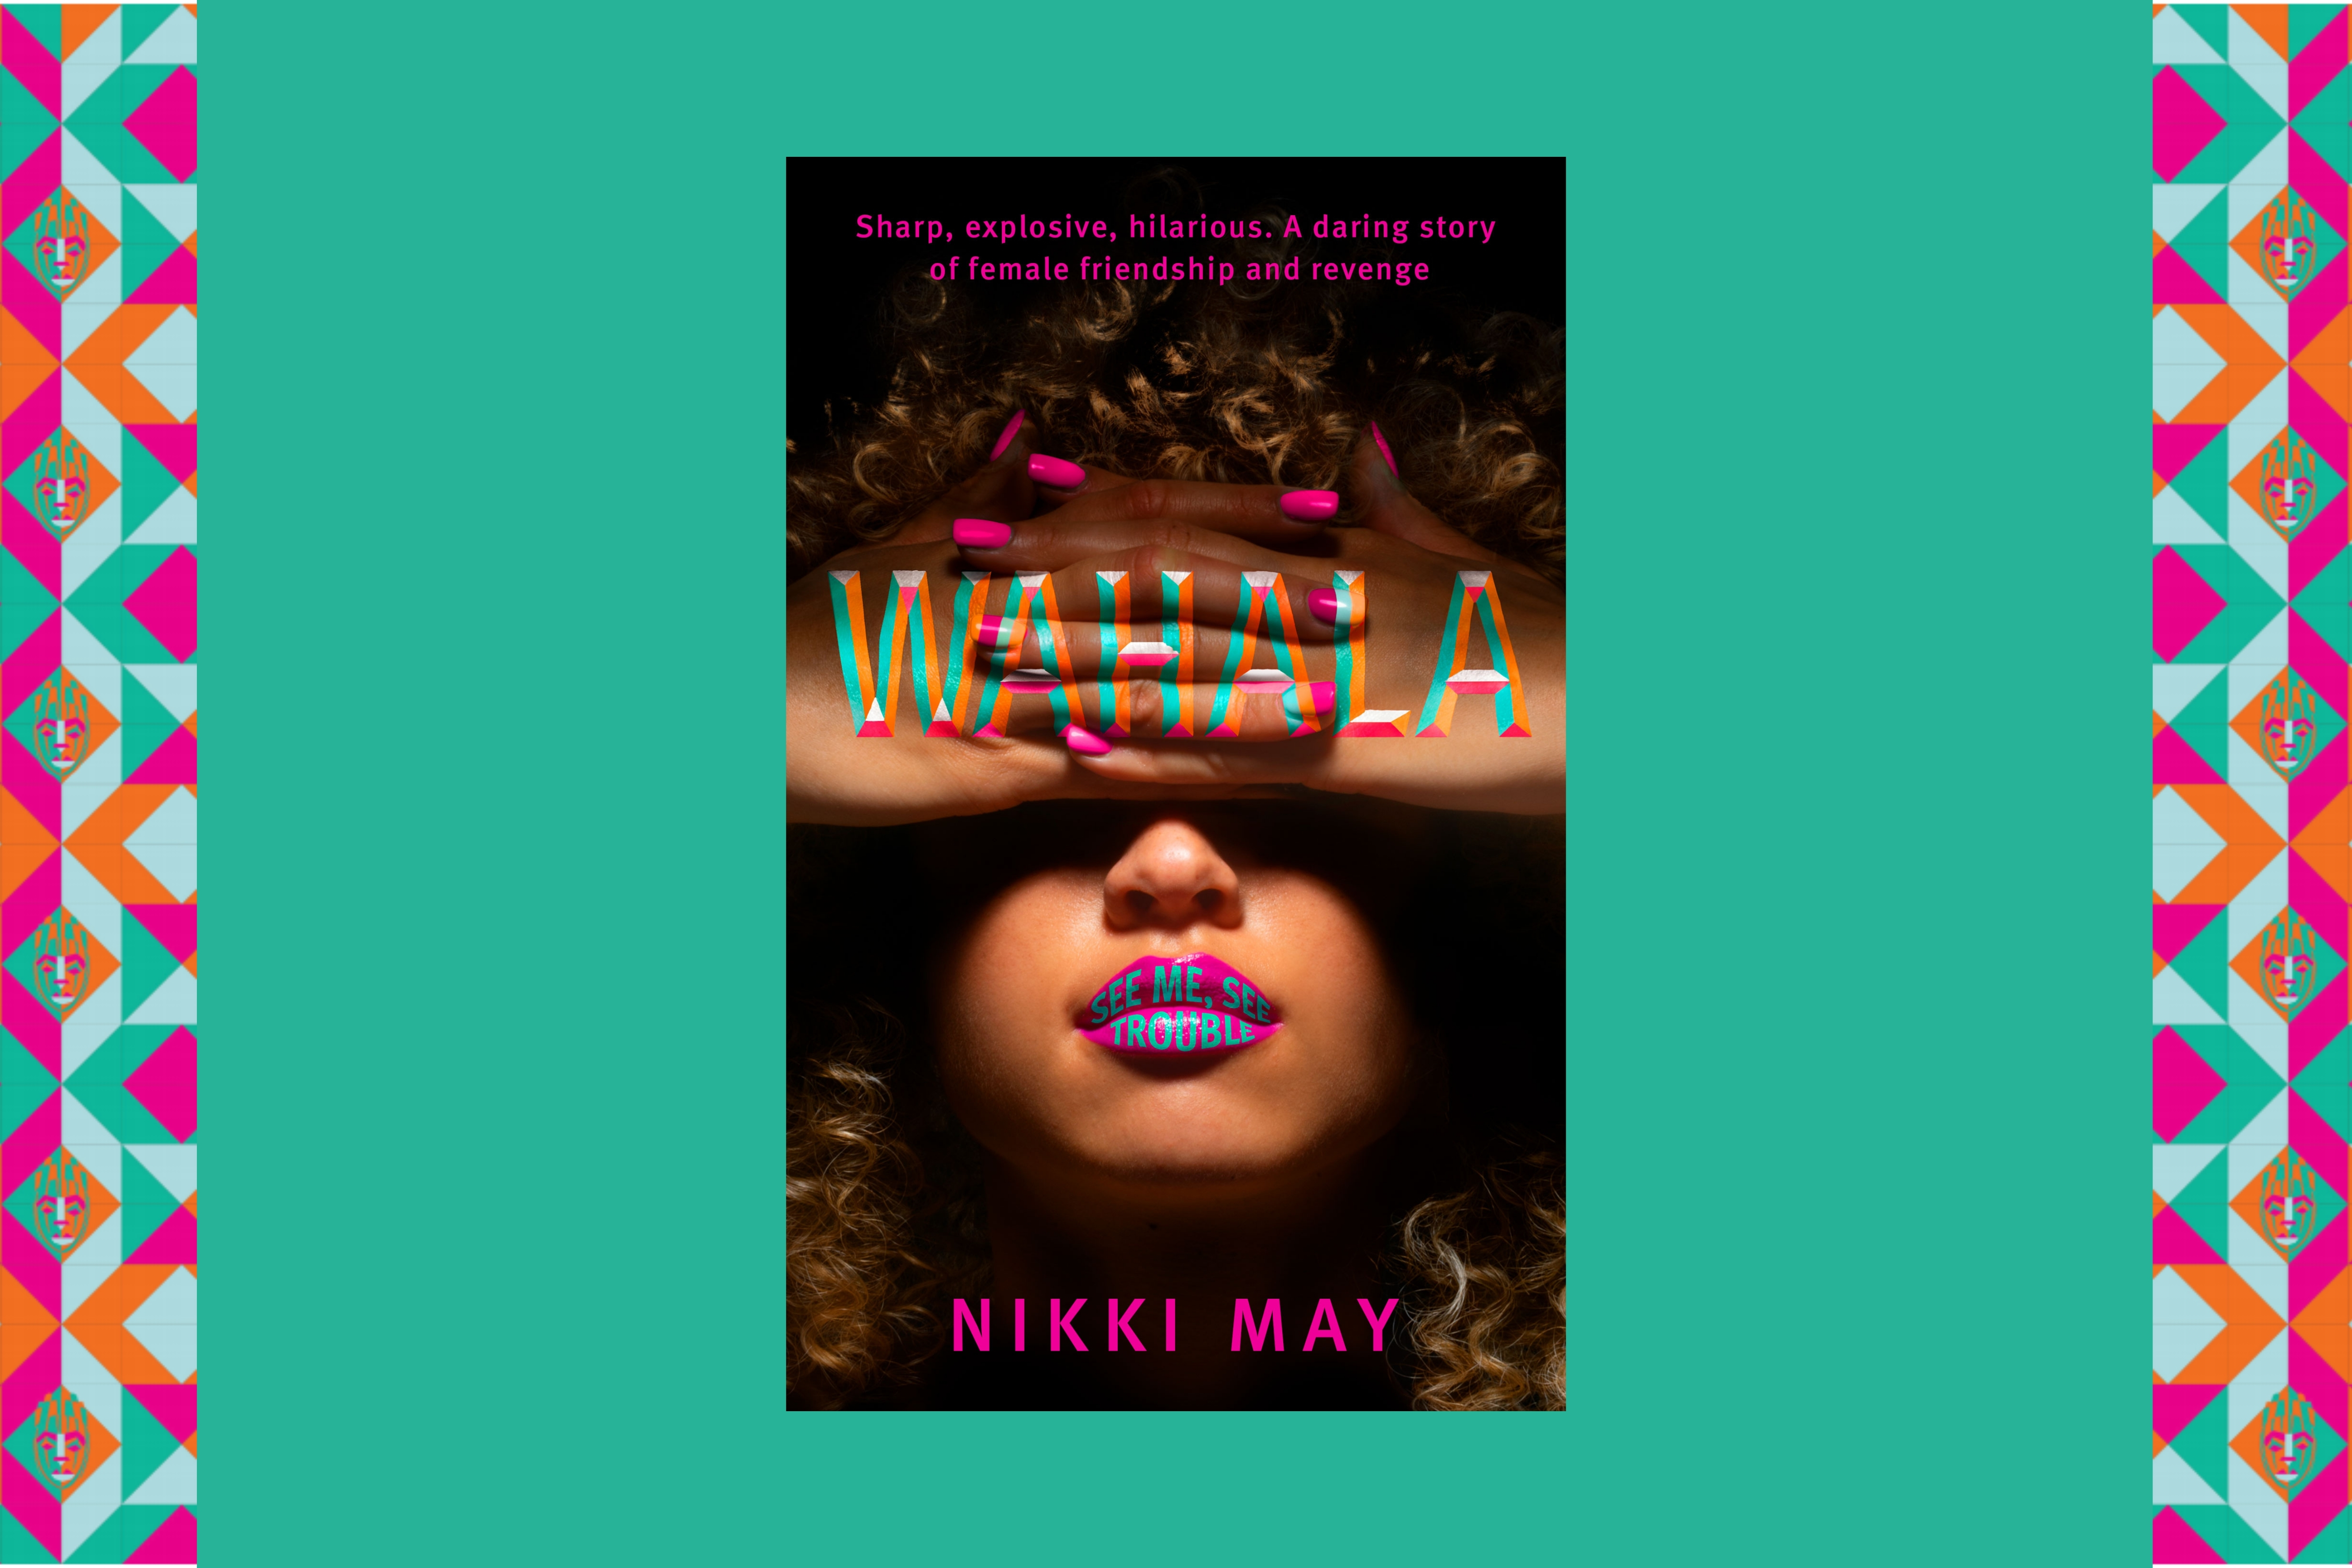 The cover of Nikki May's novel 'Wahala', overlaid on a turquoise background with with pink and orange highlights